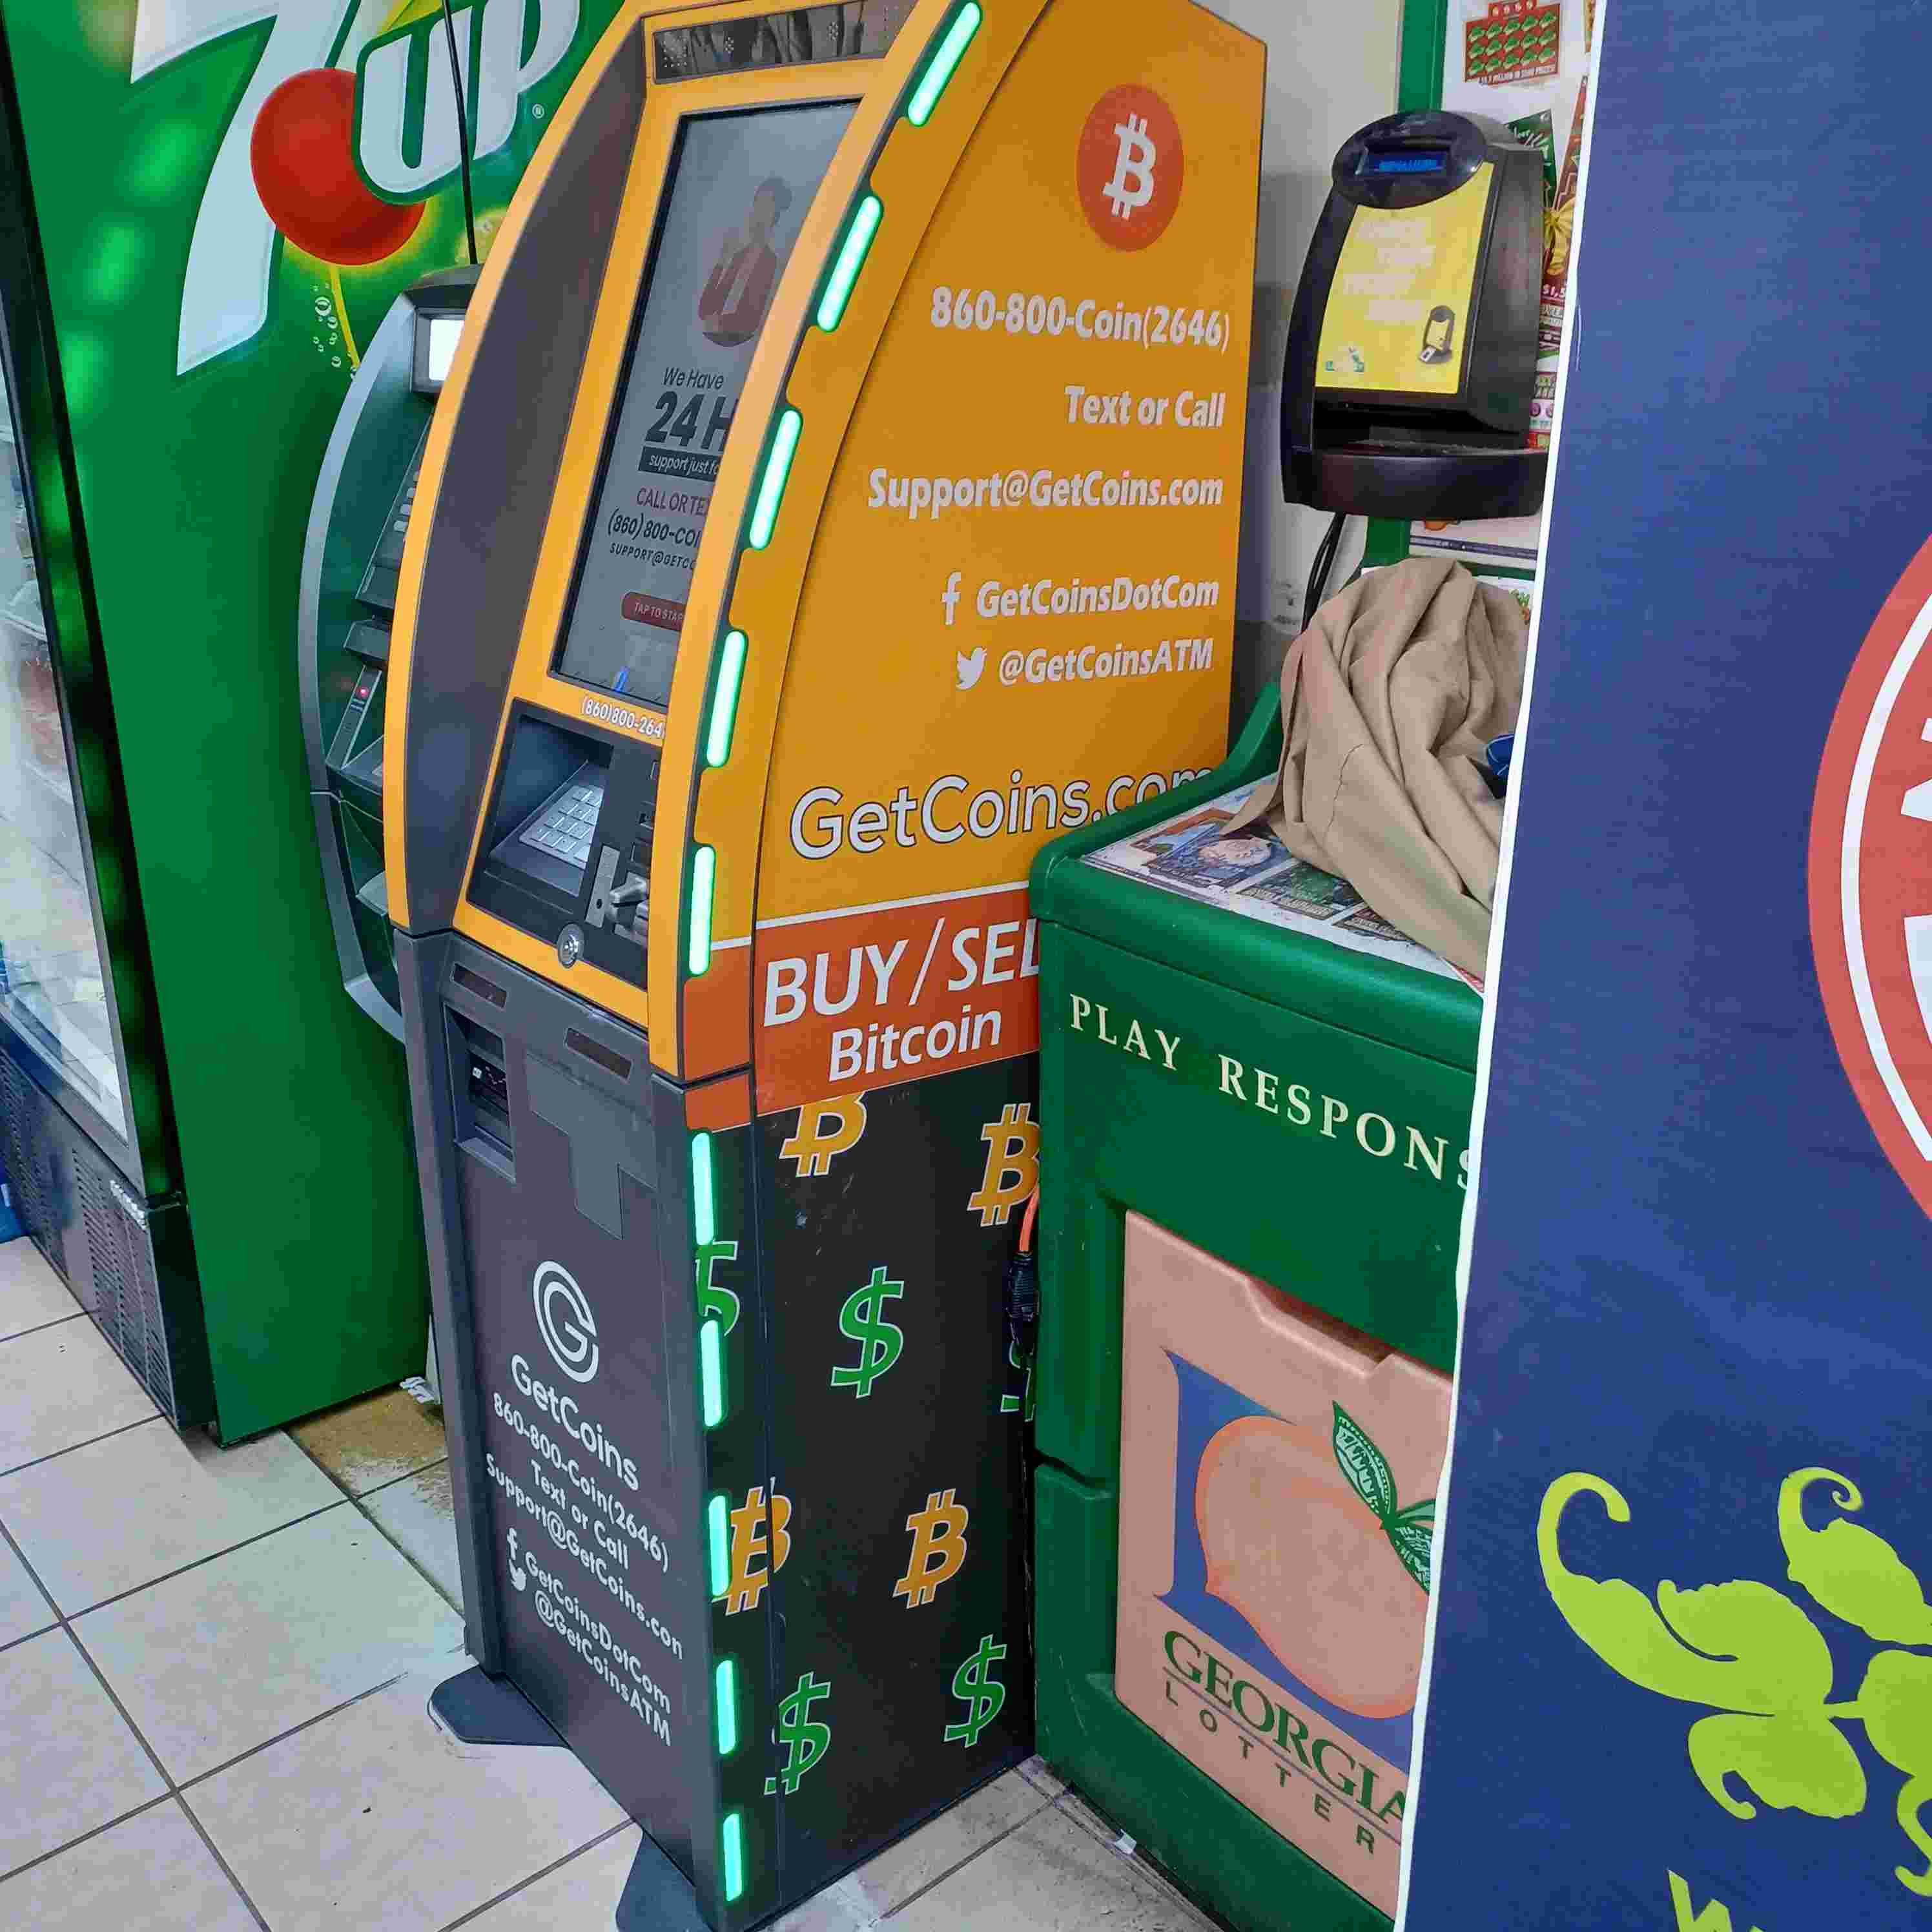 Getcoins - Bitcoin ATM - Inside of Shell in Lilburn, Georgia